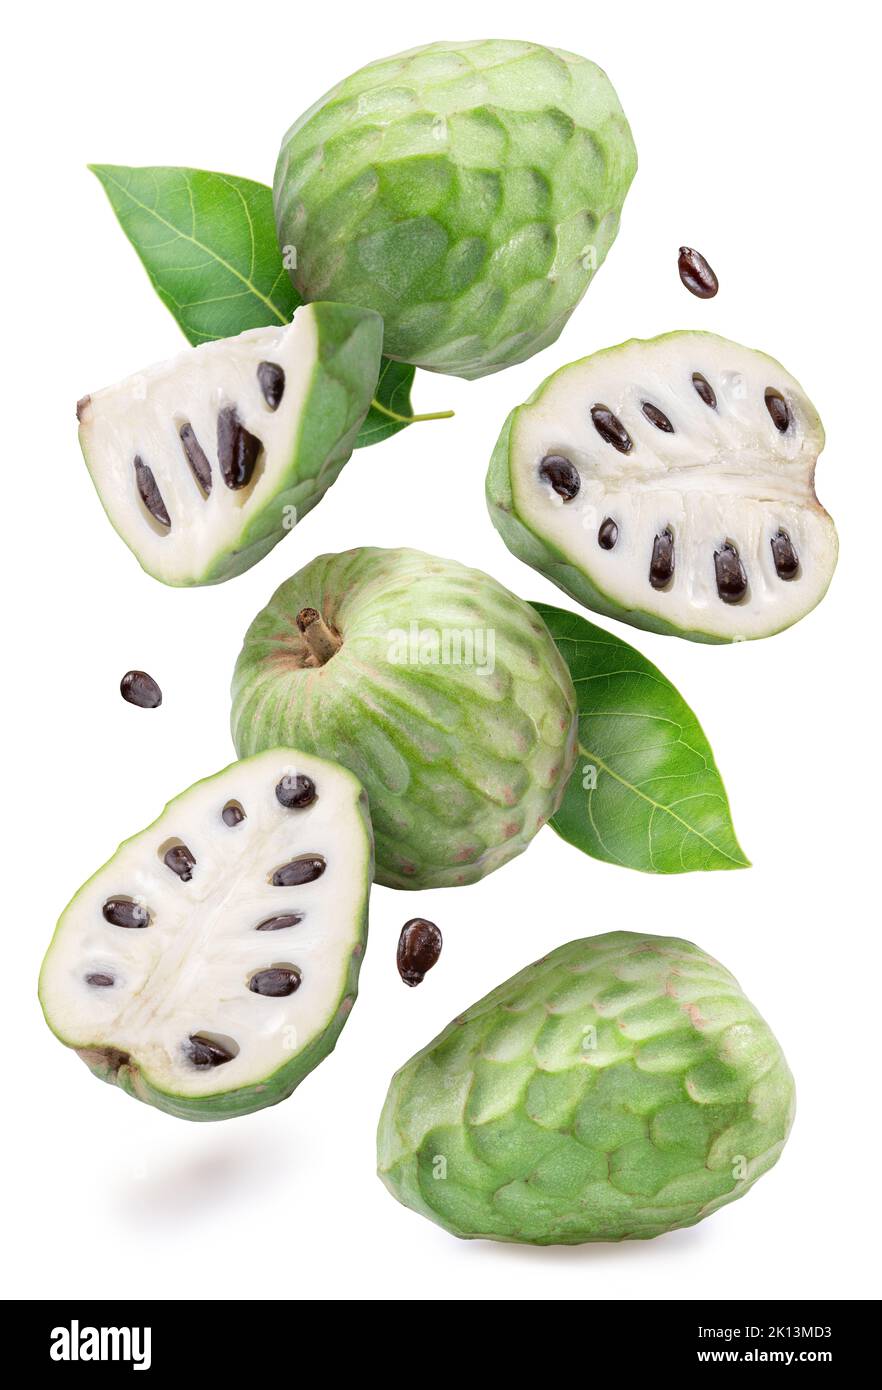 Custard apples or cherimoya fruits and slices of fruit on white background. File contains clipping paths. Stock Photo